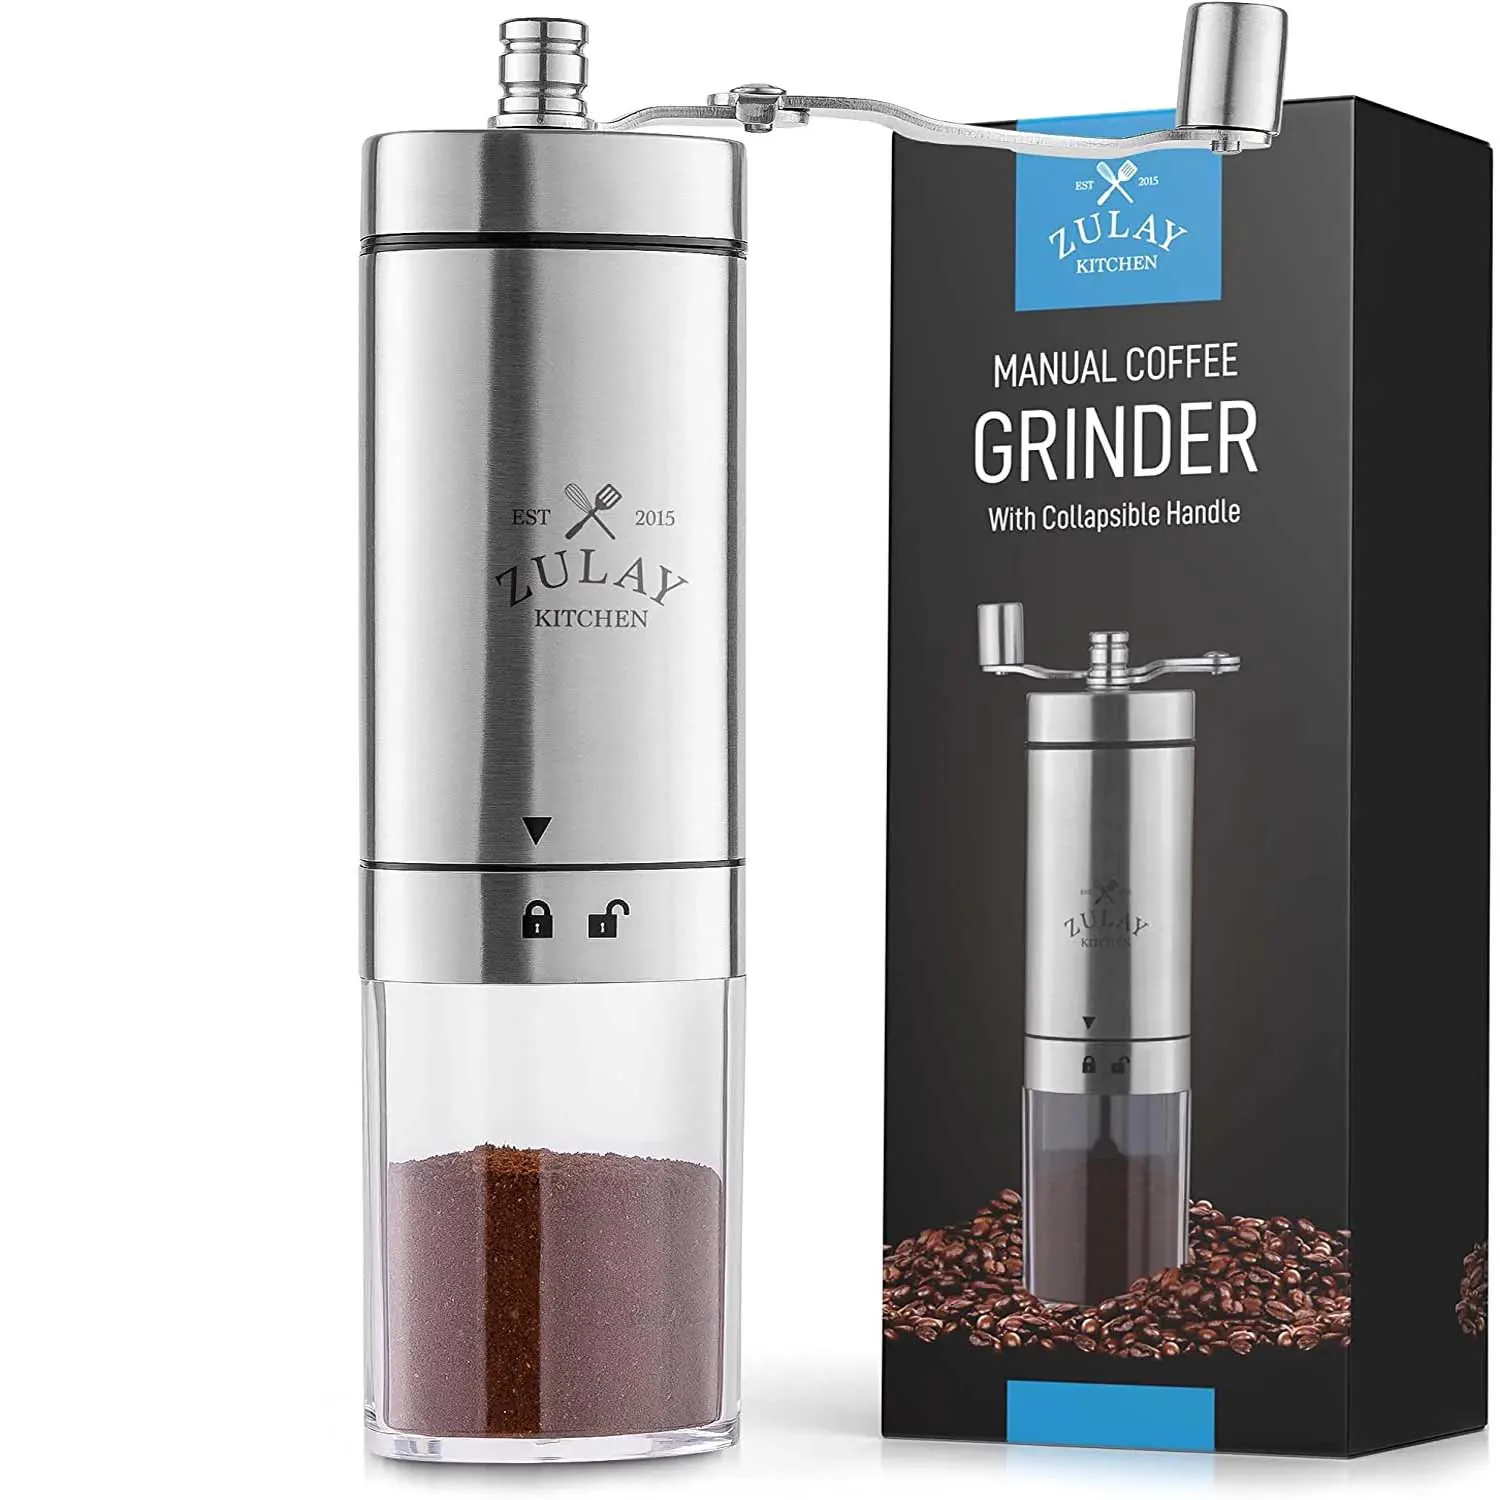 Manual Coffee Grinder With Foldable Handle